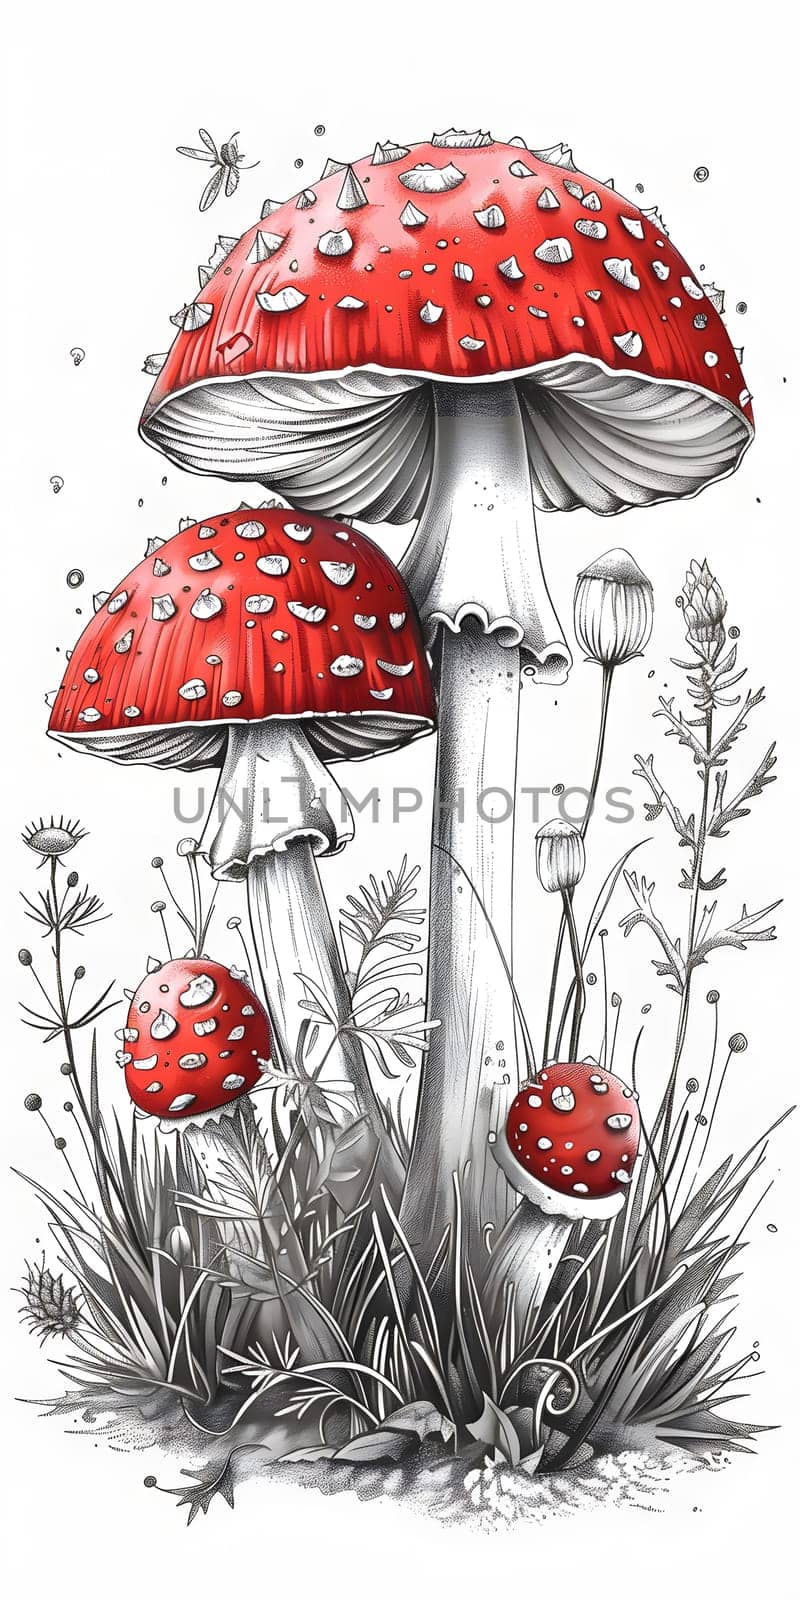 A photograph capturing a pencil drawing of three red mushrooms growing in the grass, showcasing the beauty of nature and botany in a terrestrial plant ecosystem